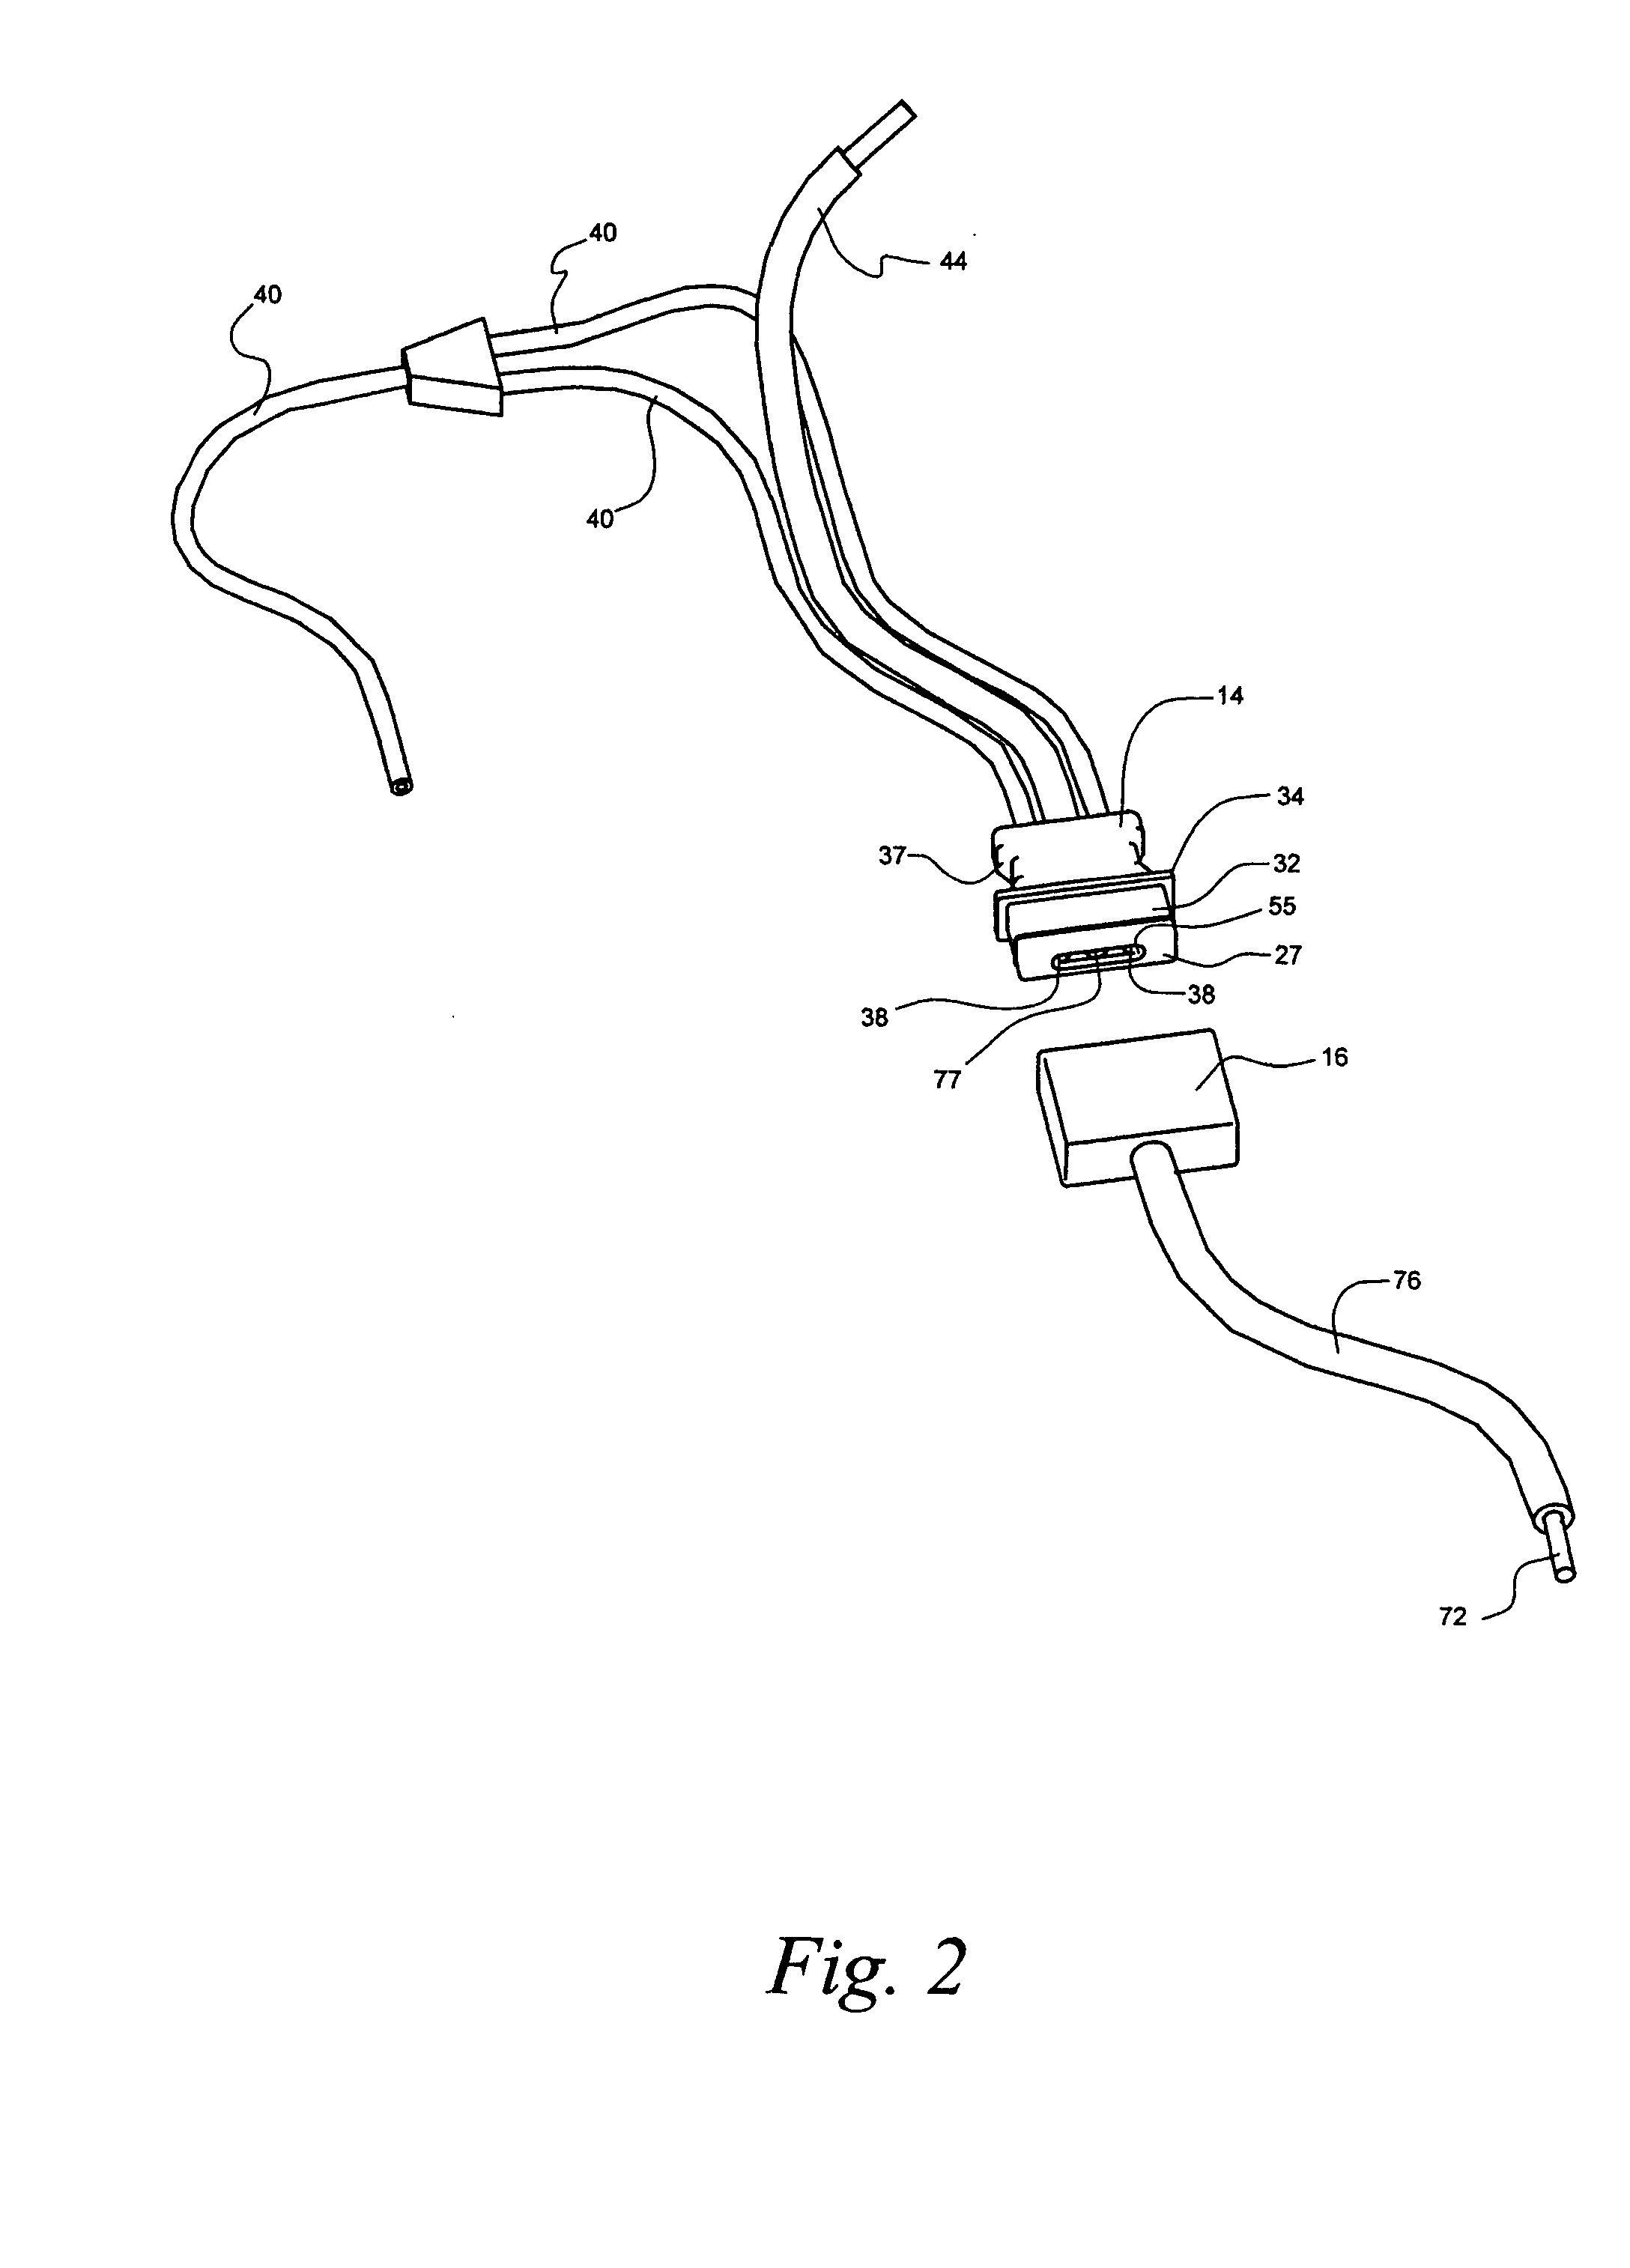 System and method for reducing the chance of fires and/or explosions